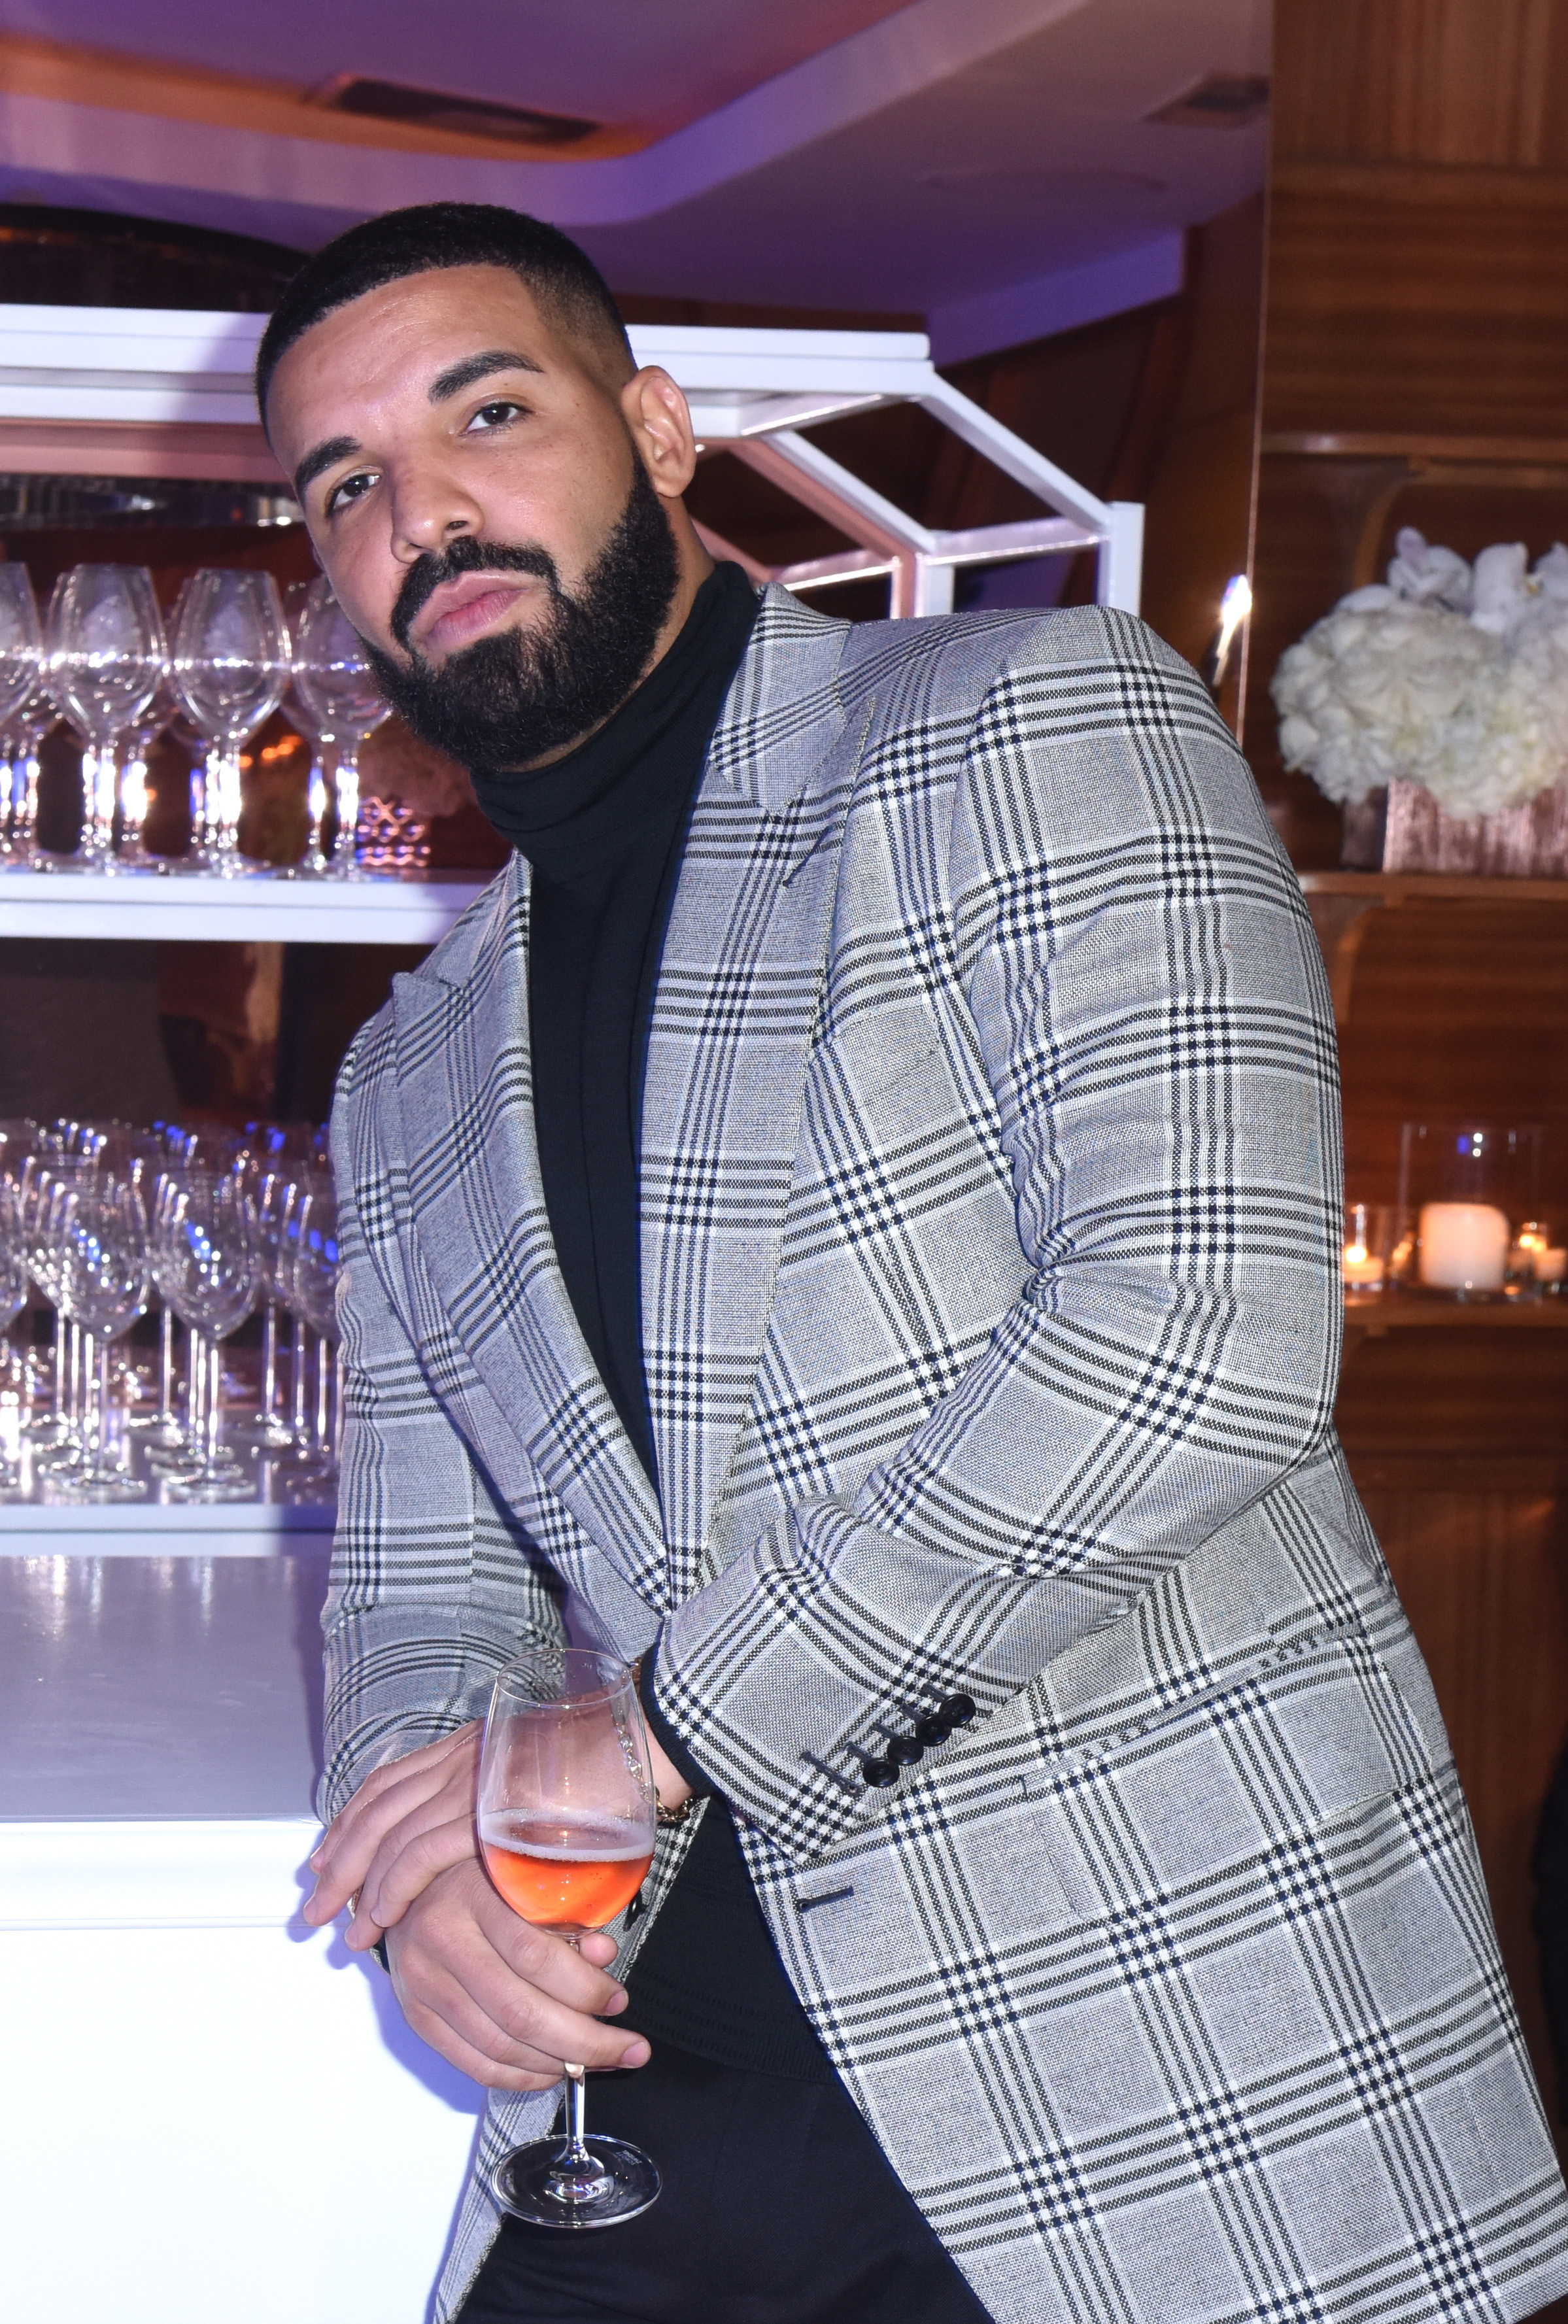 Drake at an event holding a glass of wine